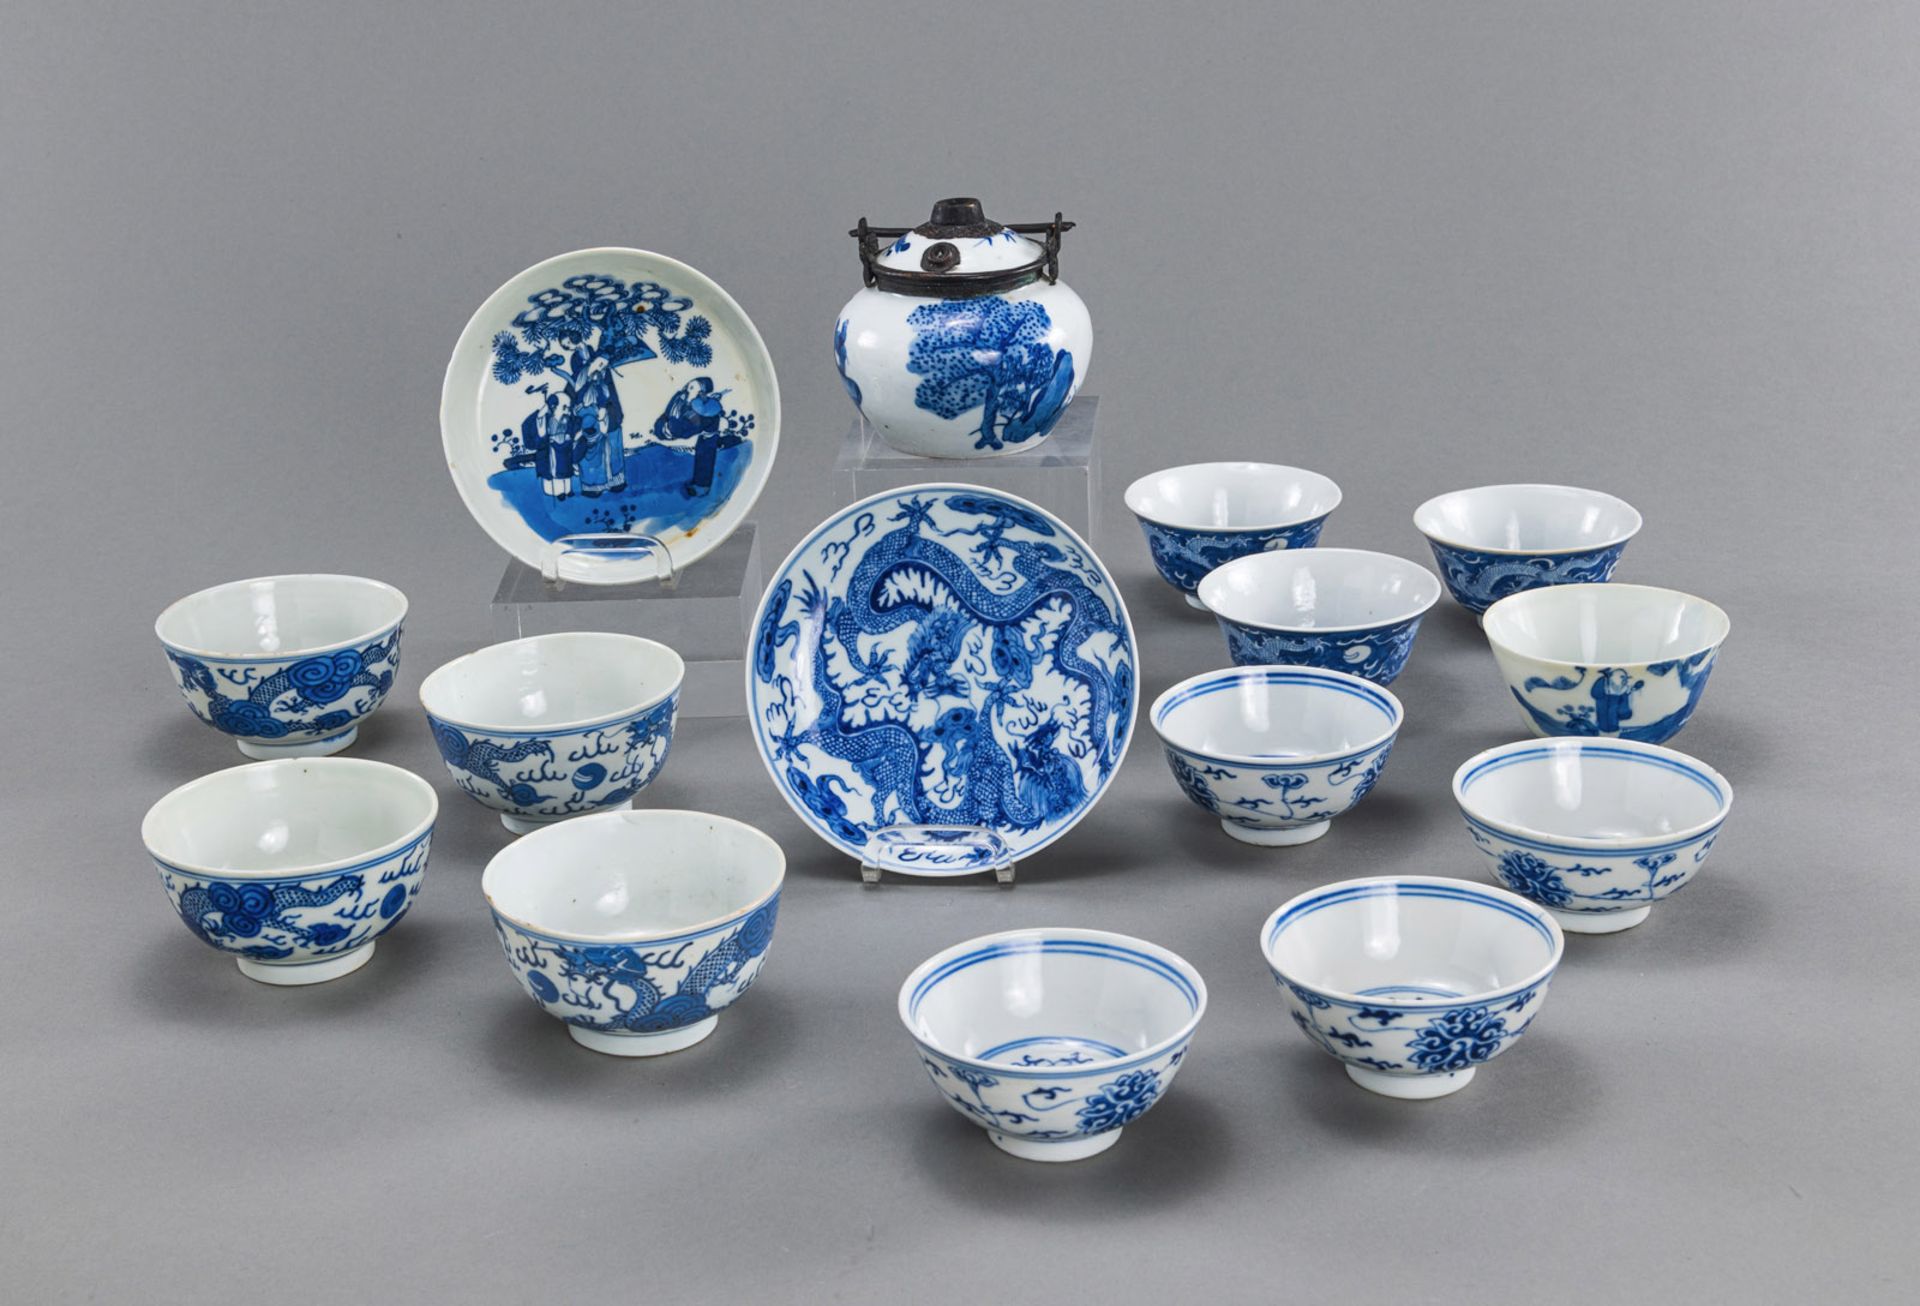 A GROUP OF 15 BLUE AND WHITE PORCELAIN BOWLS AND DISHES